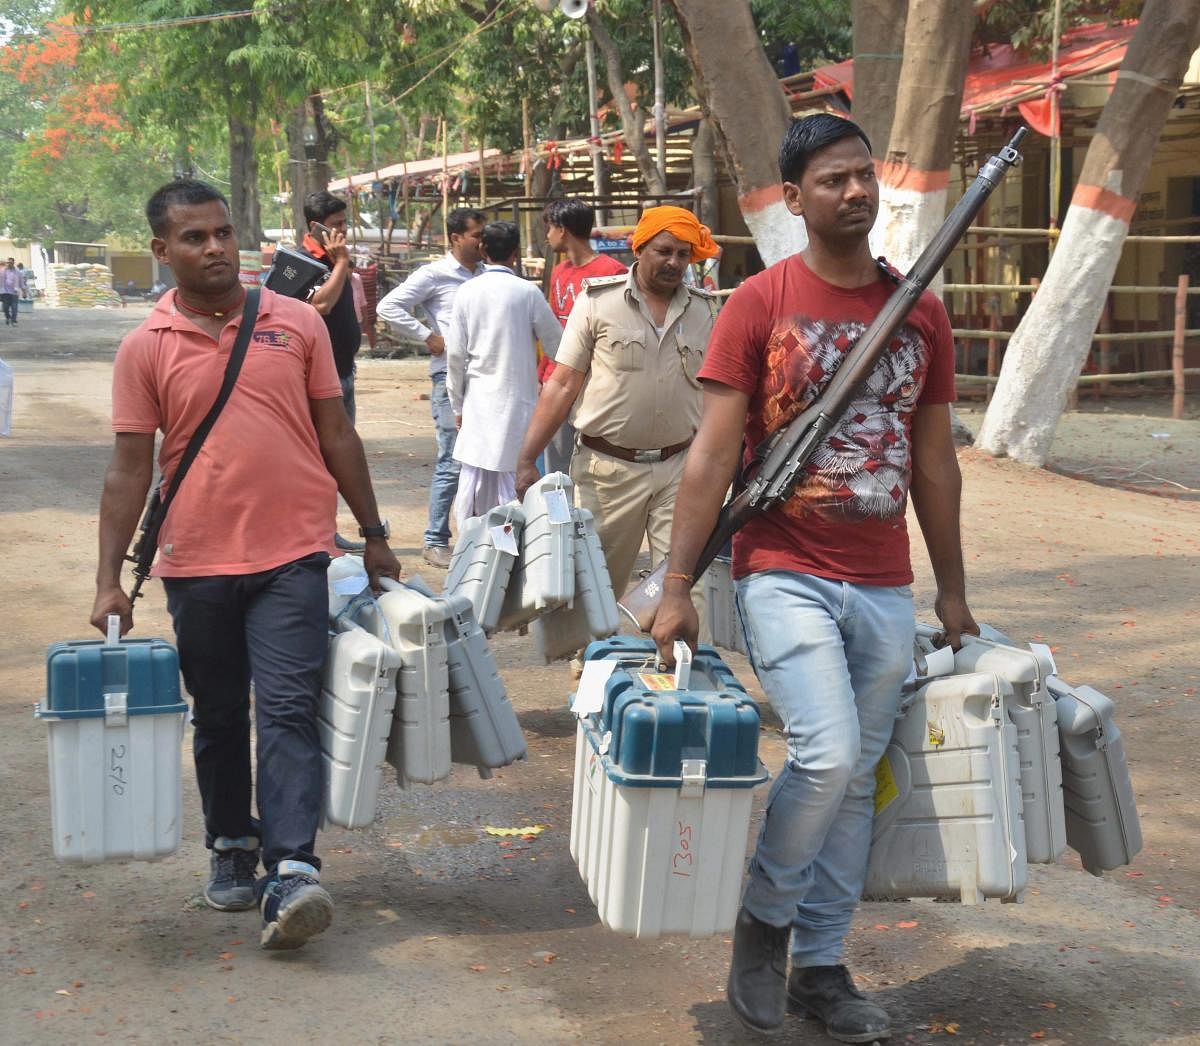 Muzaffarpur: Election officials leave after collecting VVPAT, EVMs and other polling materials from collection centres ahead of the sixth phase of Lok Sabha polls, at Muzaffarpur, Saturday, May 11, 2019. (PTI Photo) (PTI5_11_2019_000068B)